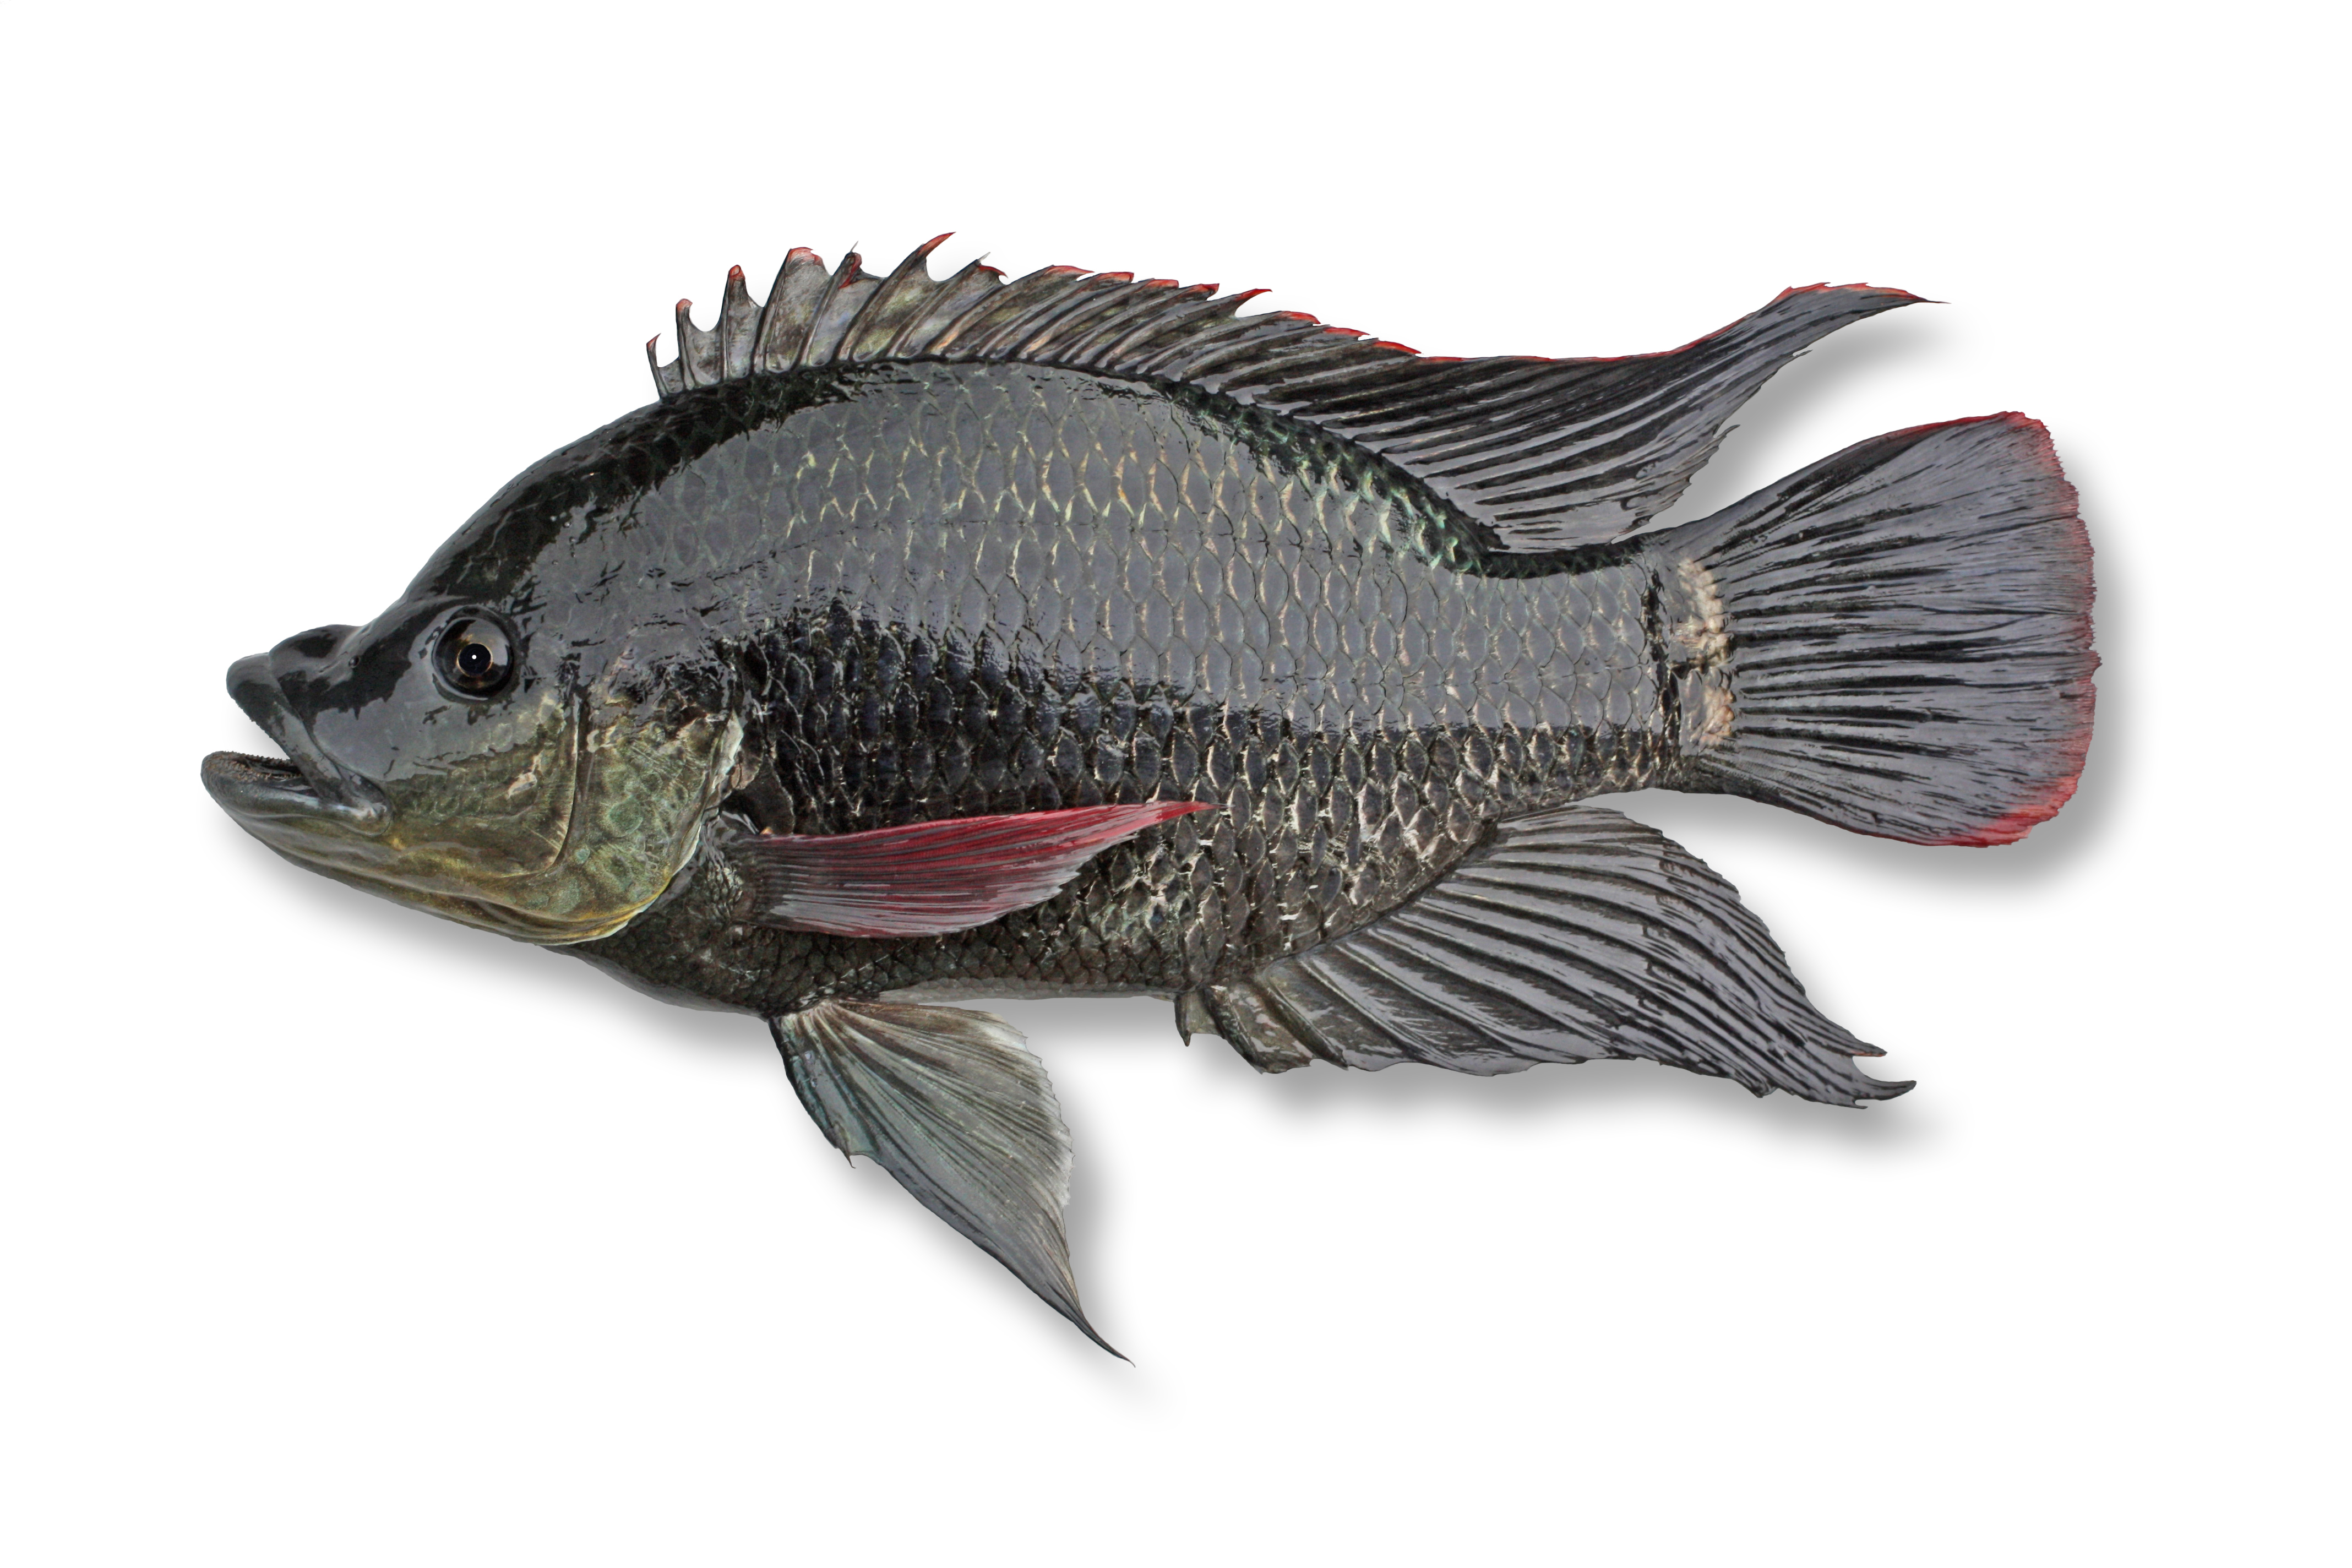 Mozambique tilapia/mouthbrooder,Oreochromis mossambicus. Image: DAFF